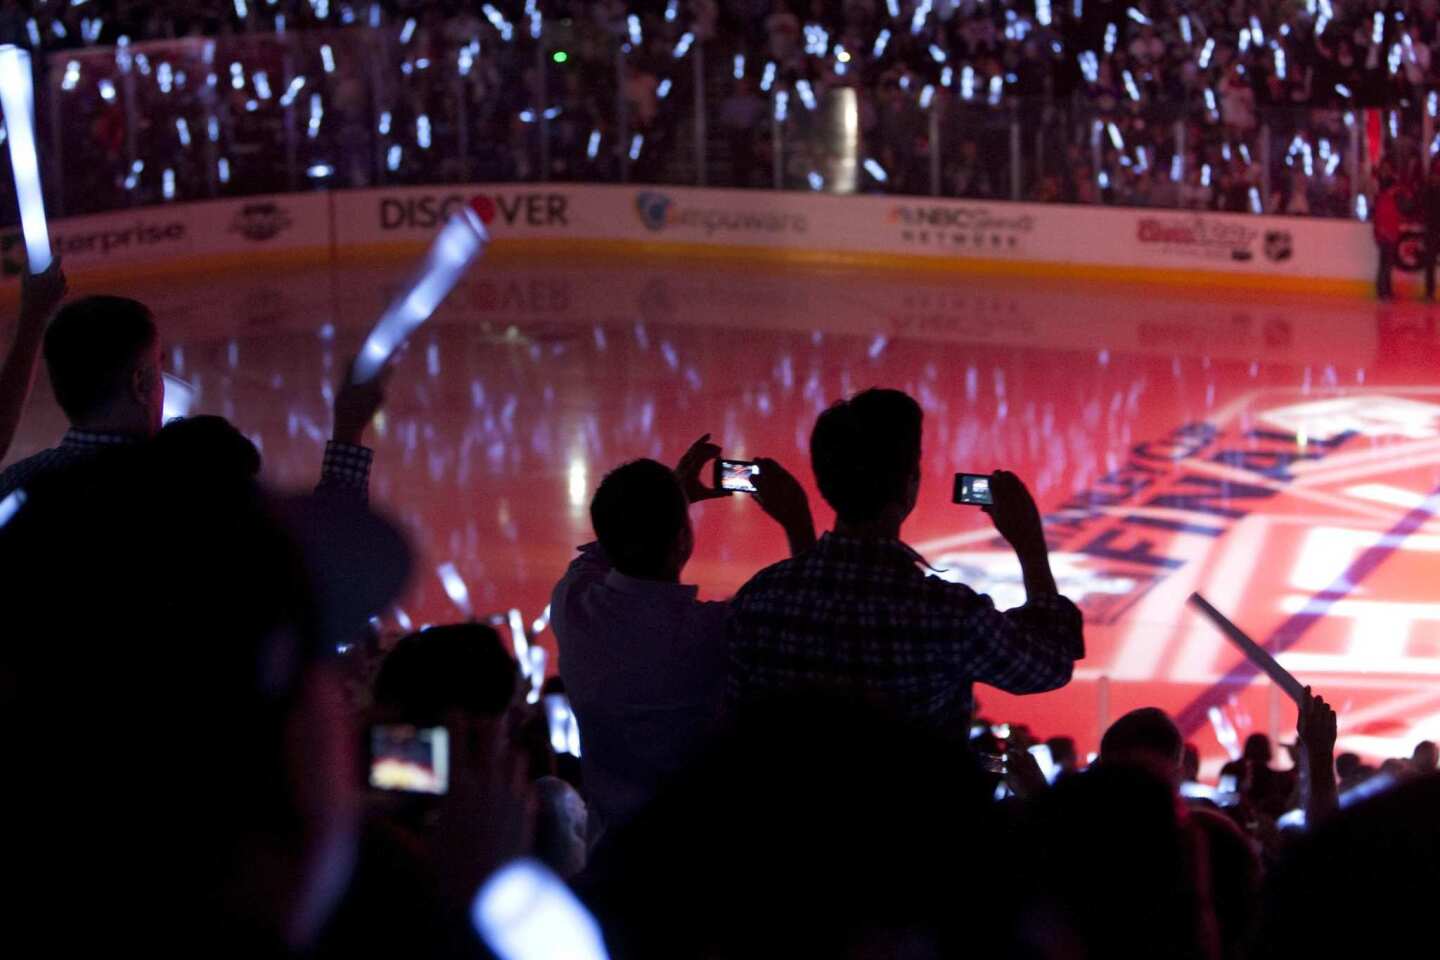 Fans wave glow sticks and snap photographs before the start of Game 3 of the Stanley Cup Final between the Kings and New Jersey Devils at Staples Center on Monday.